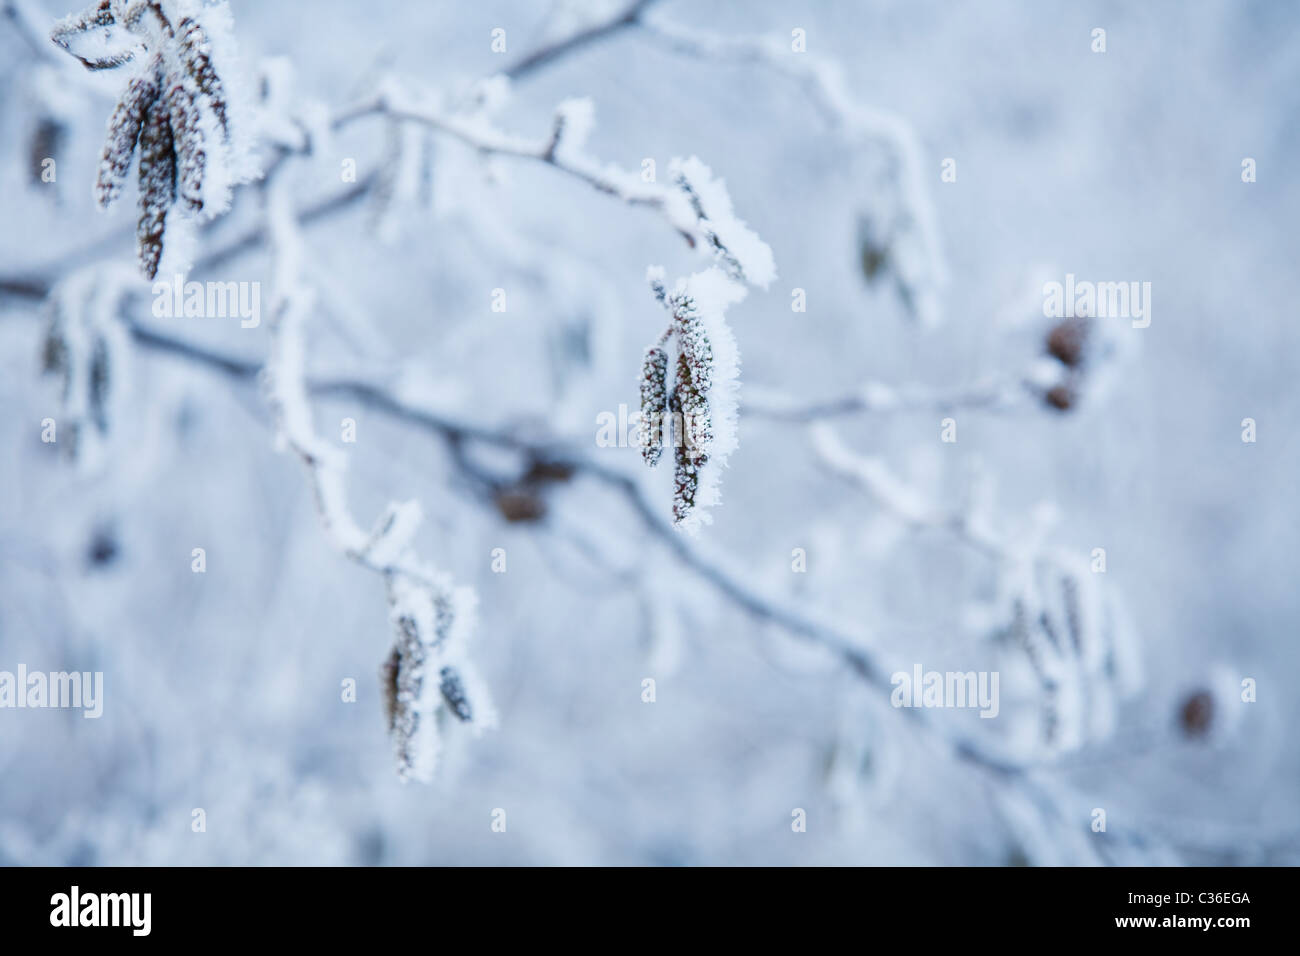 branches covered in snow and ice crystals Stock Photo